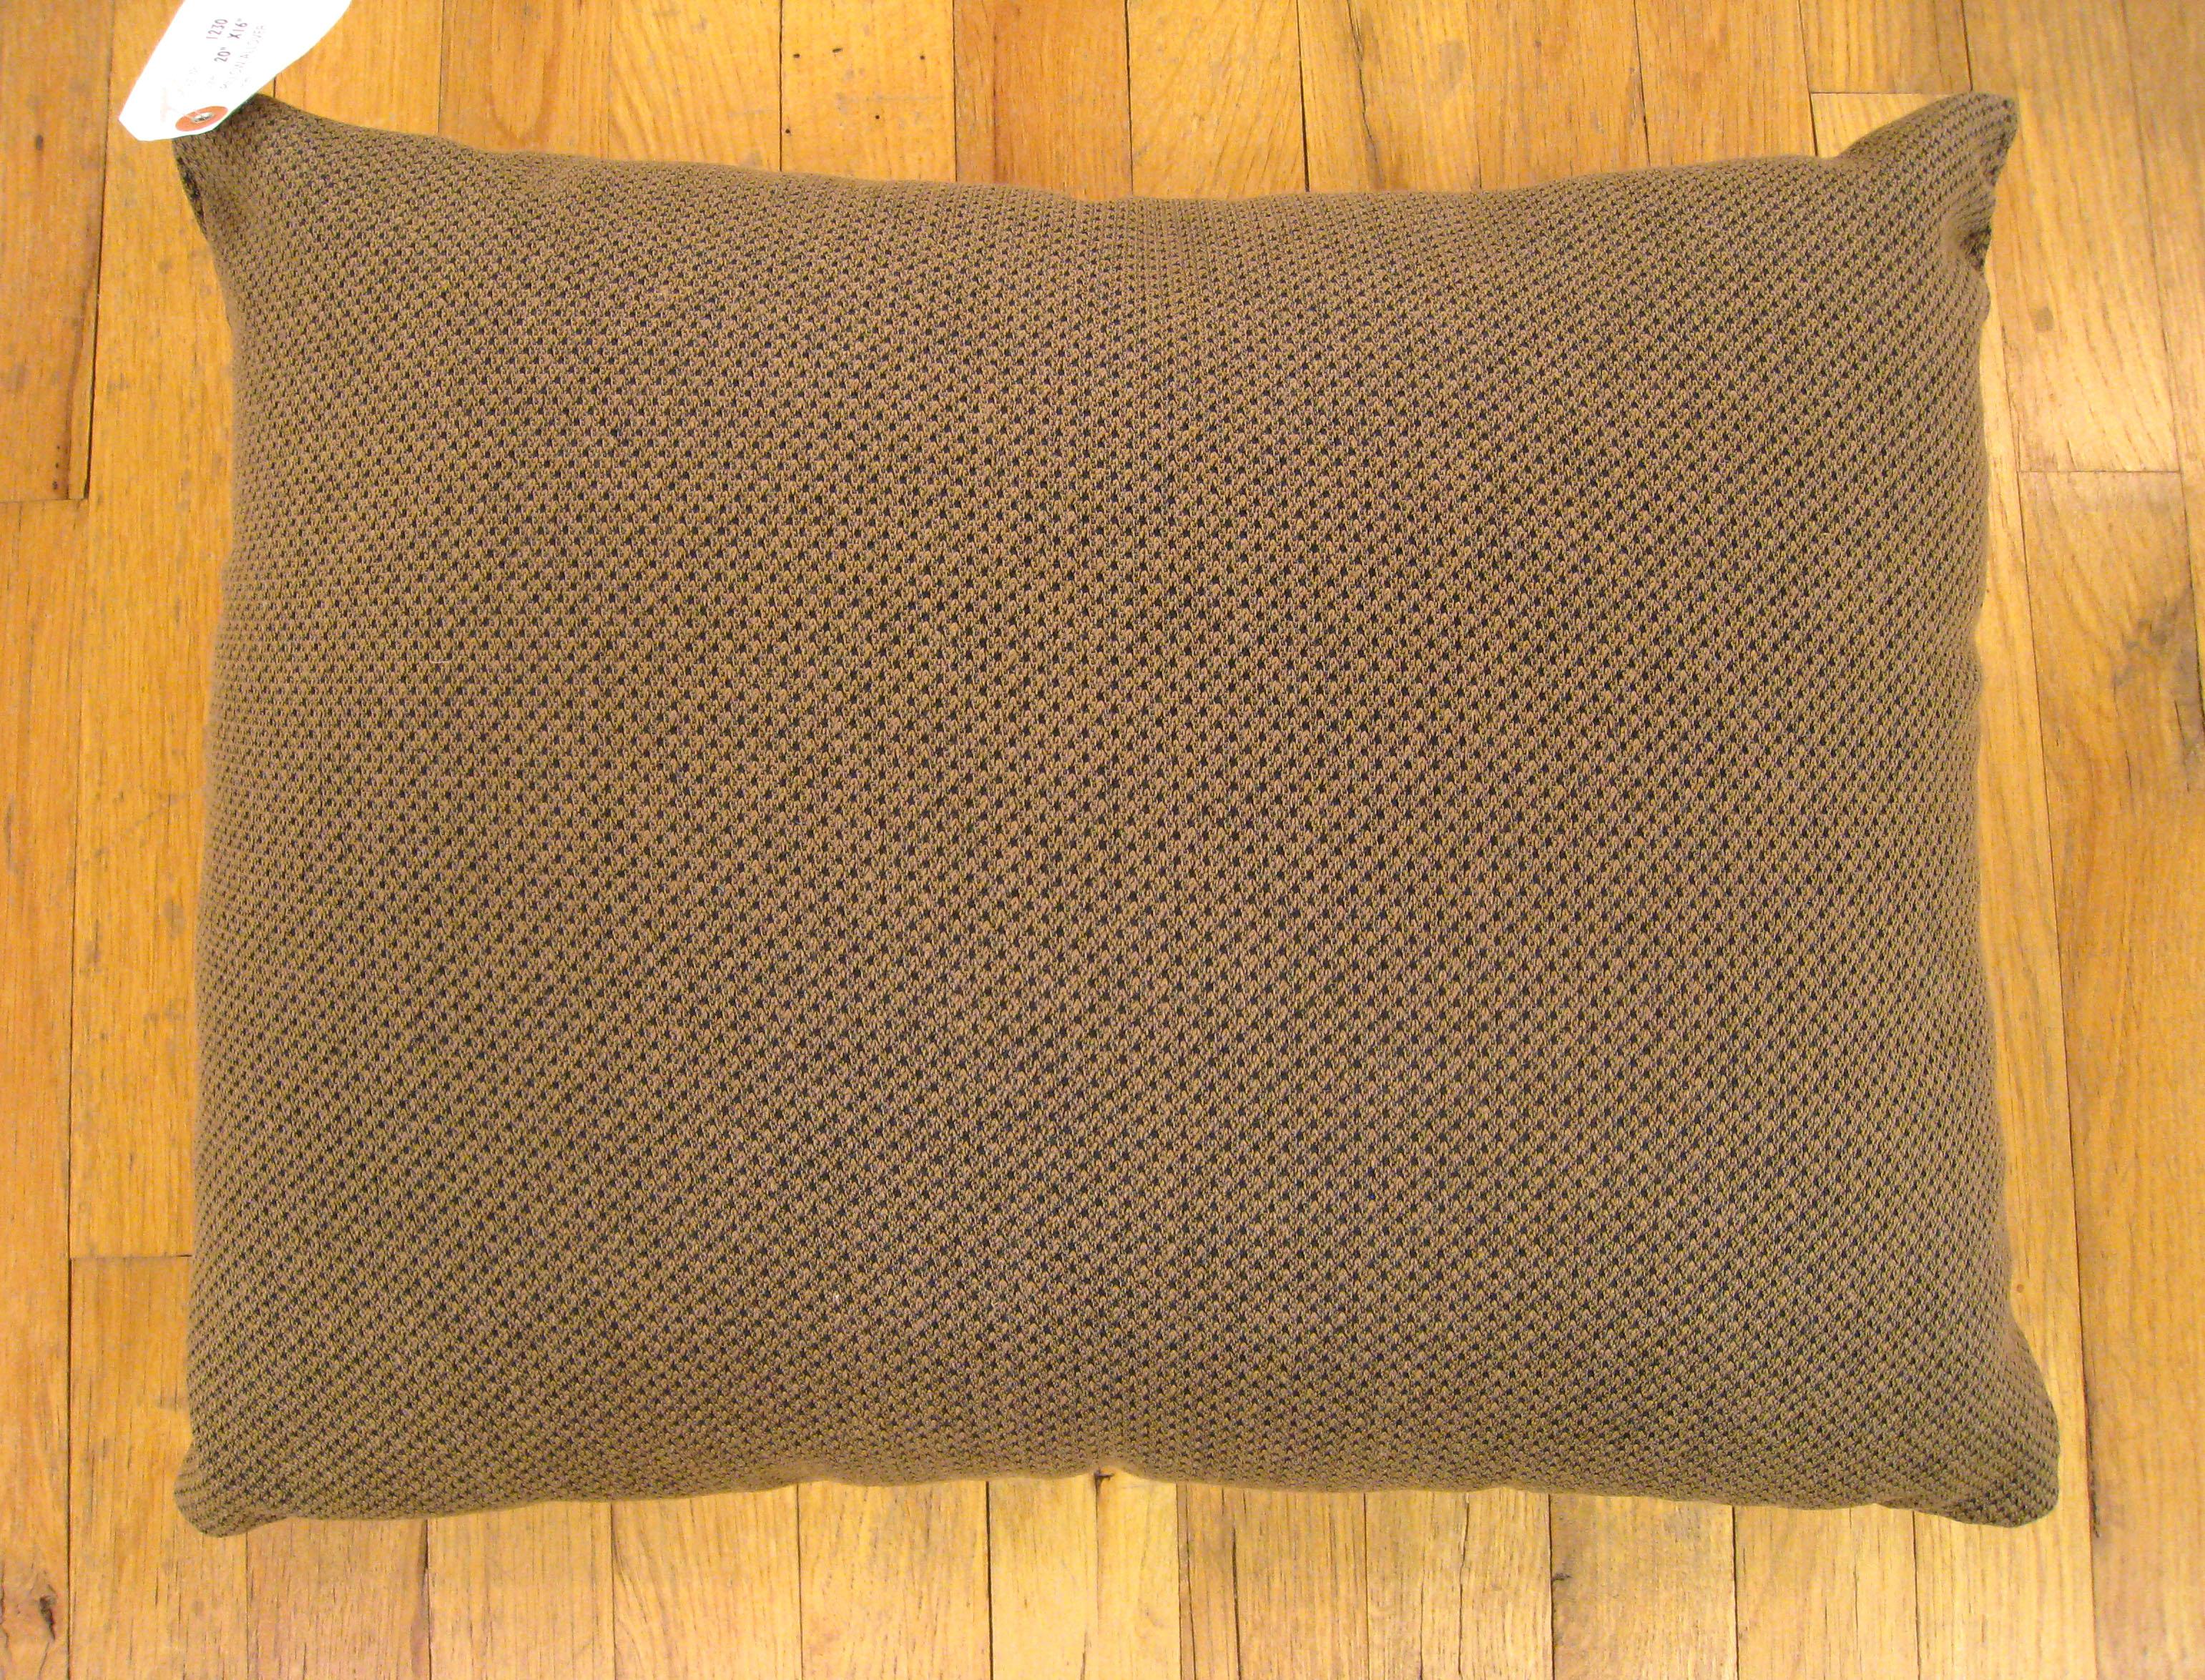 A vintage decorative pillow, double-sided, with brown fabric on both sides, size 20